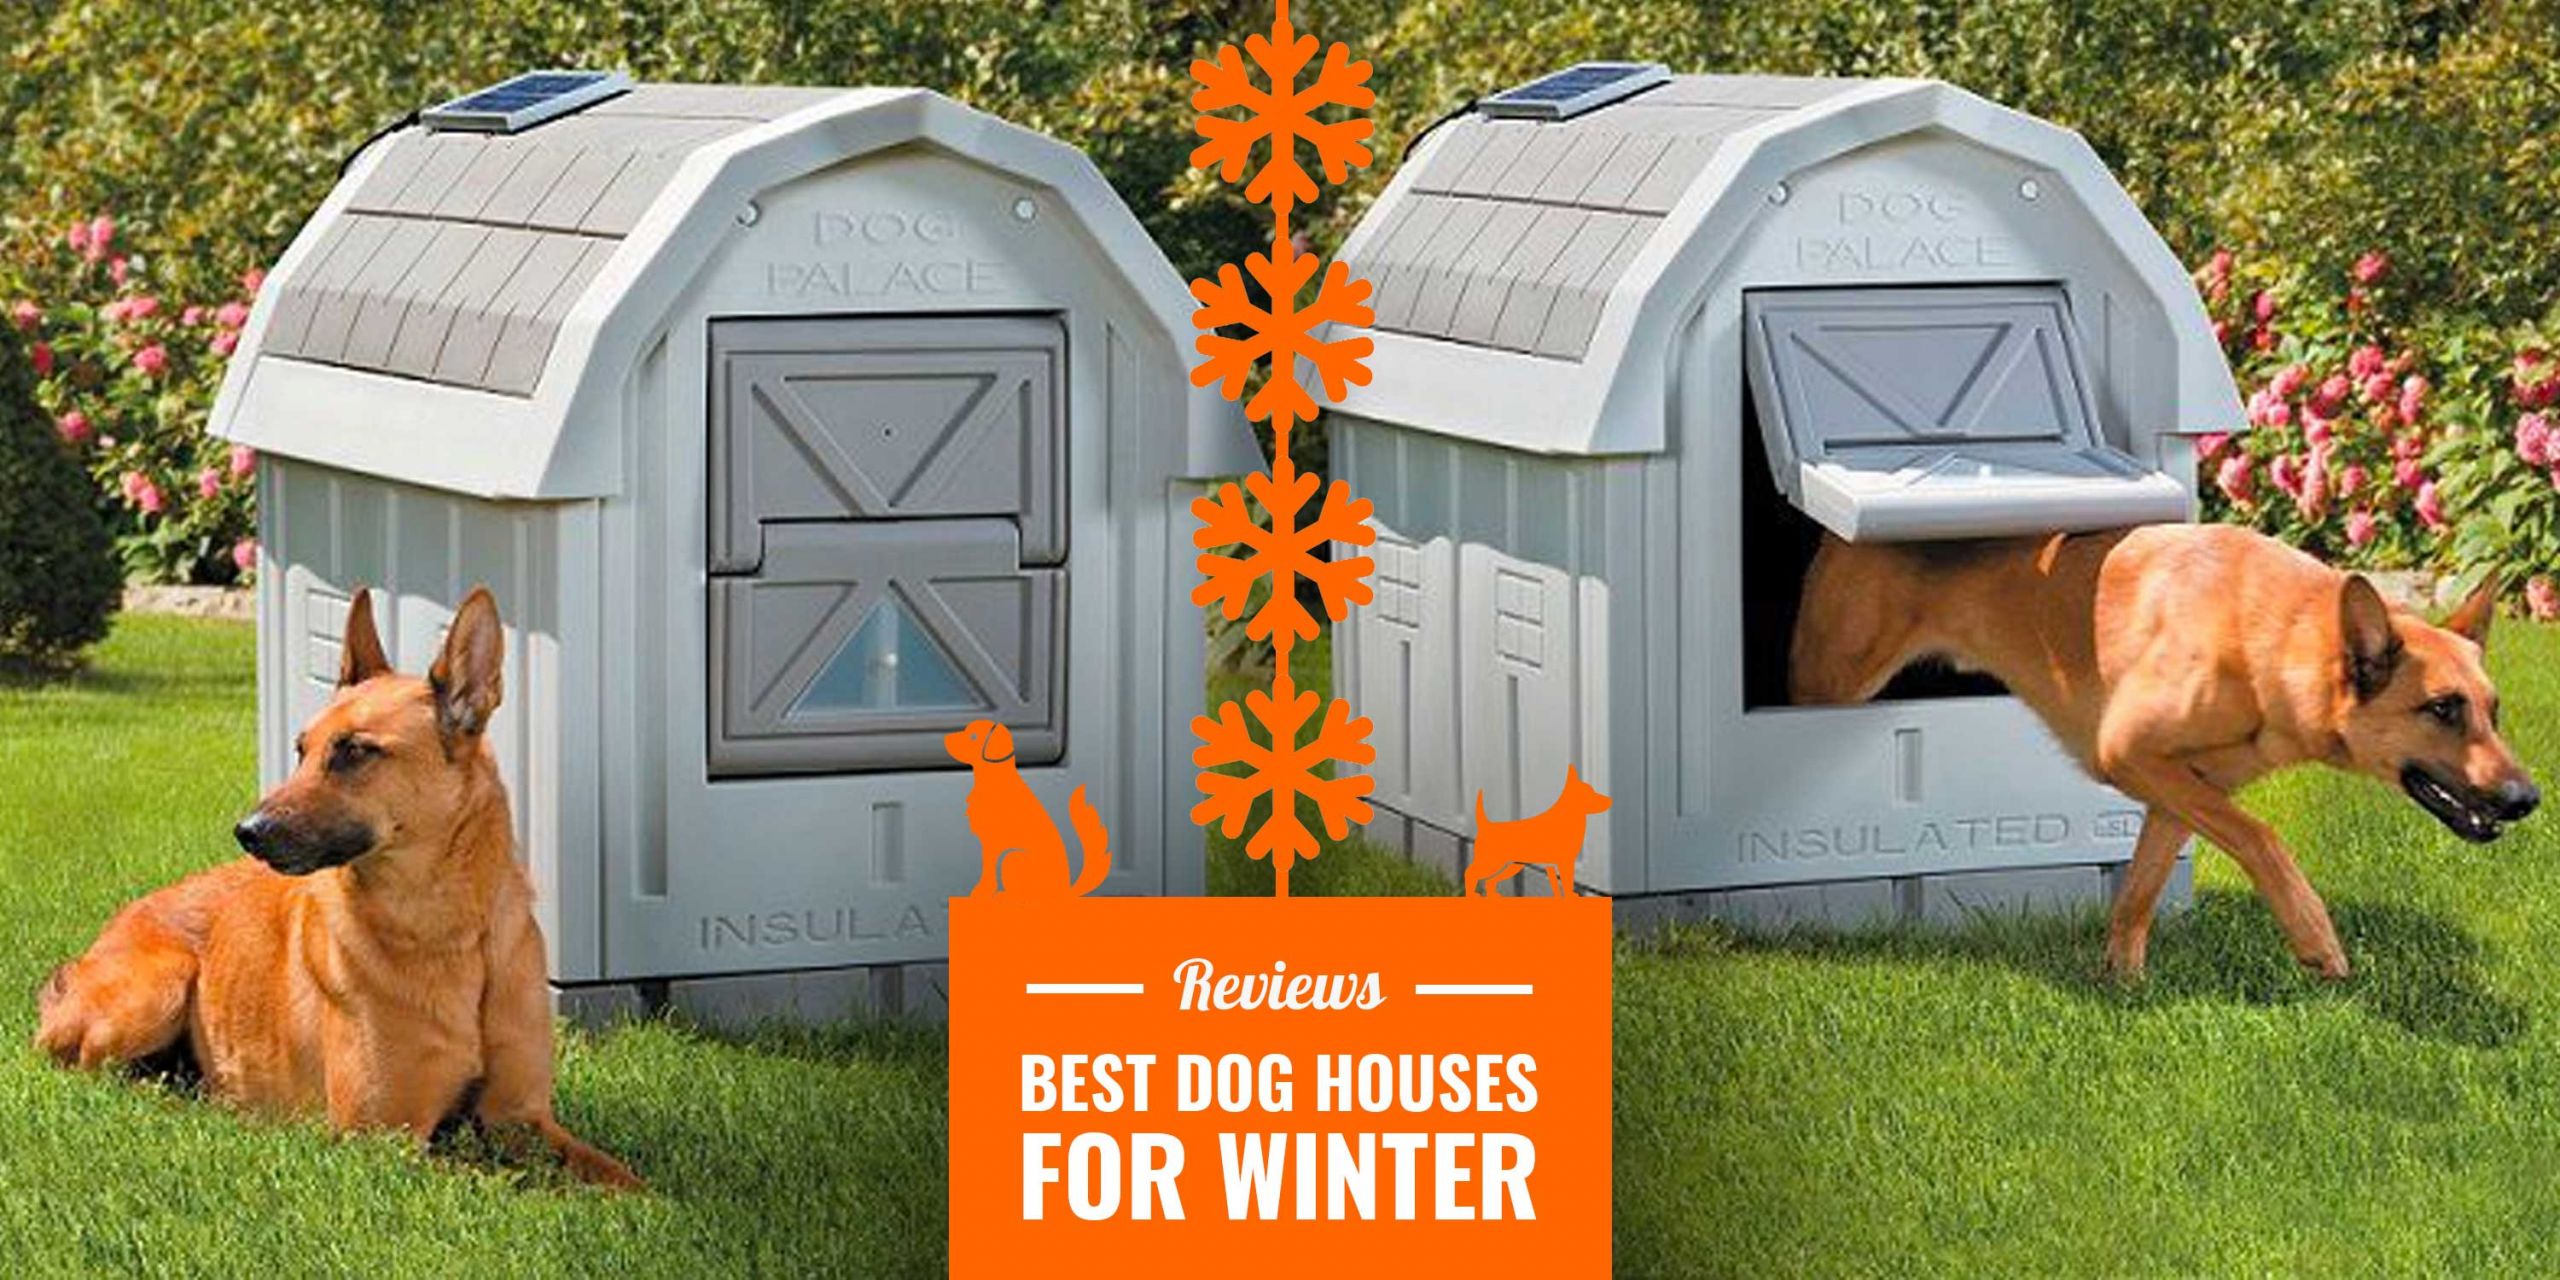 DIY Insulated Dog House
 10 Best Dog Houses for Winter — Reviews Insulation Tips